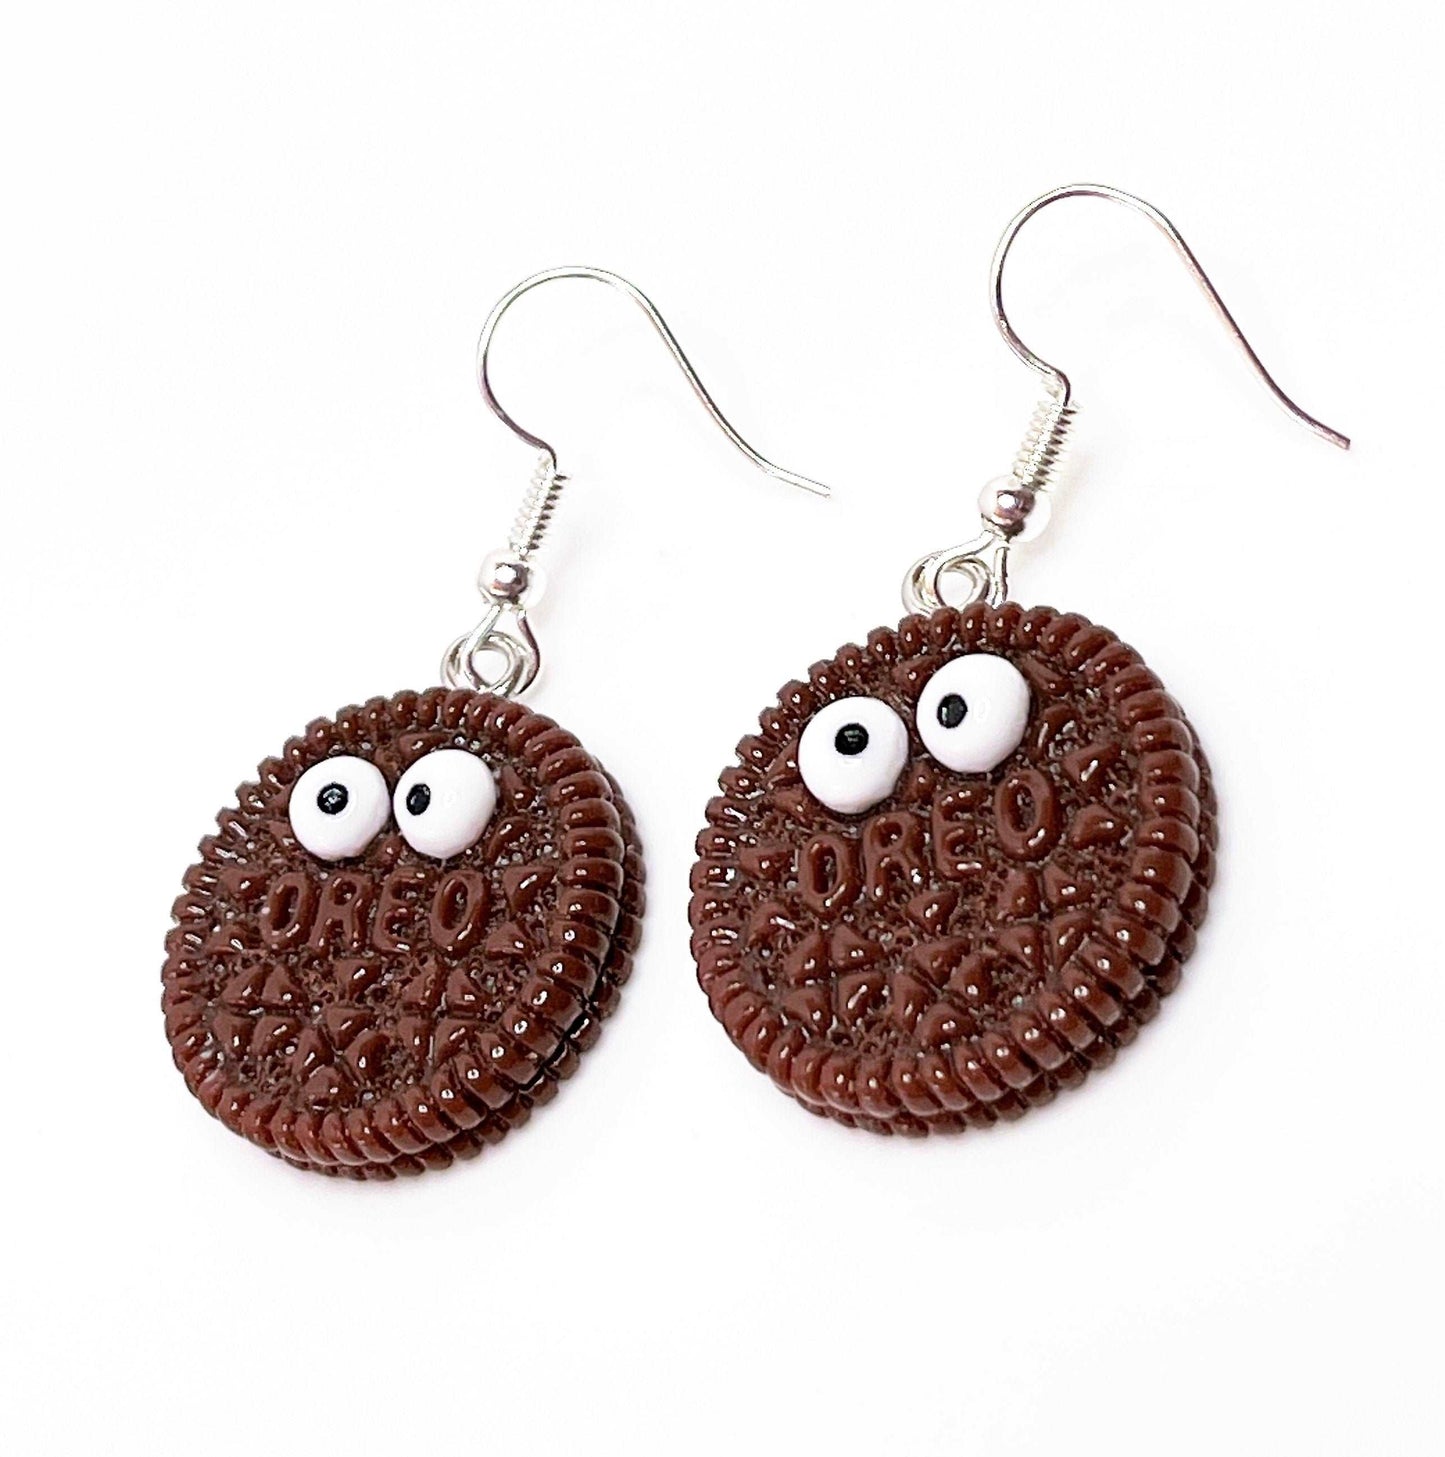 Cute Funny Face Cookie Earrings, Silver Plated, Sterling Silver, Resin Biscuit Earrings, Funky Drops, Earrings for Women, Quirky Drops